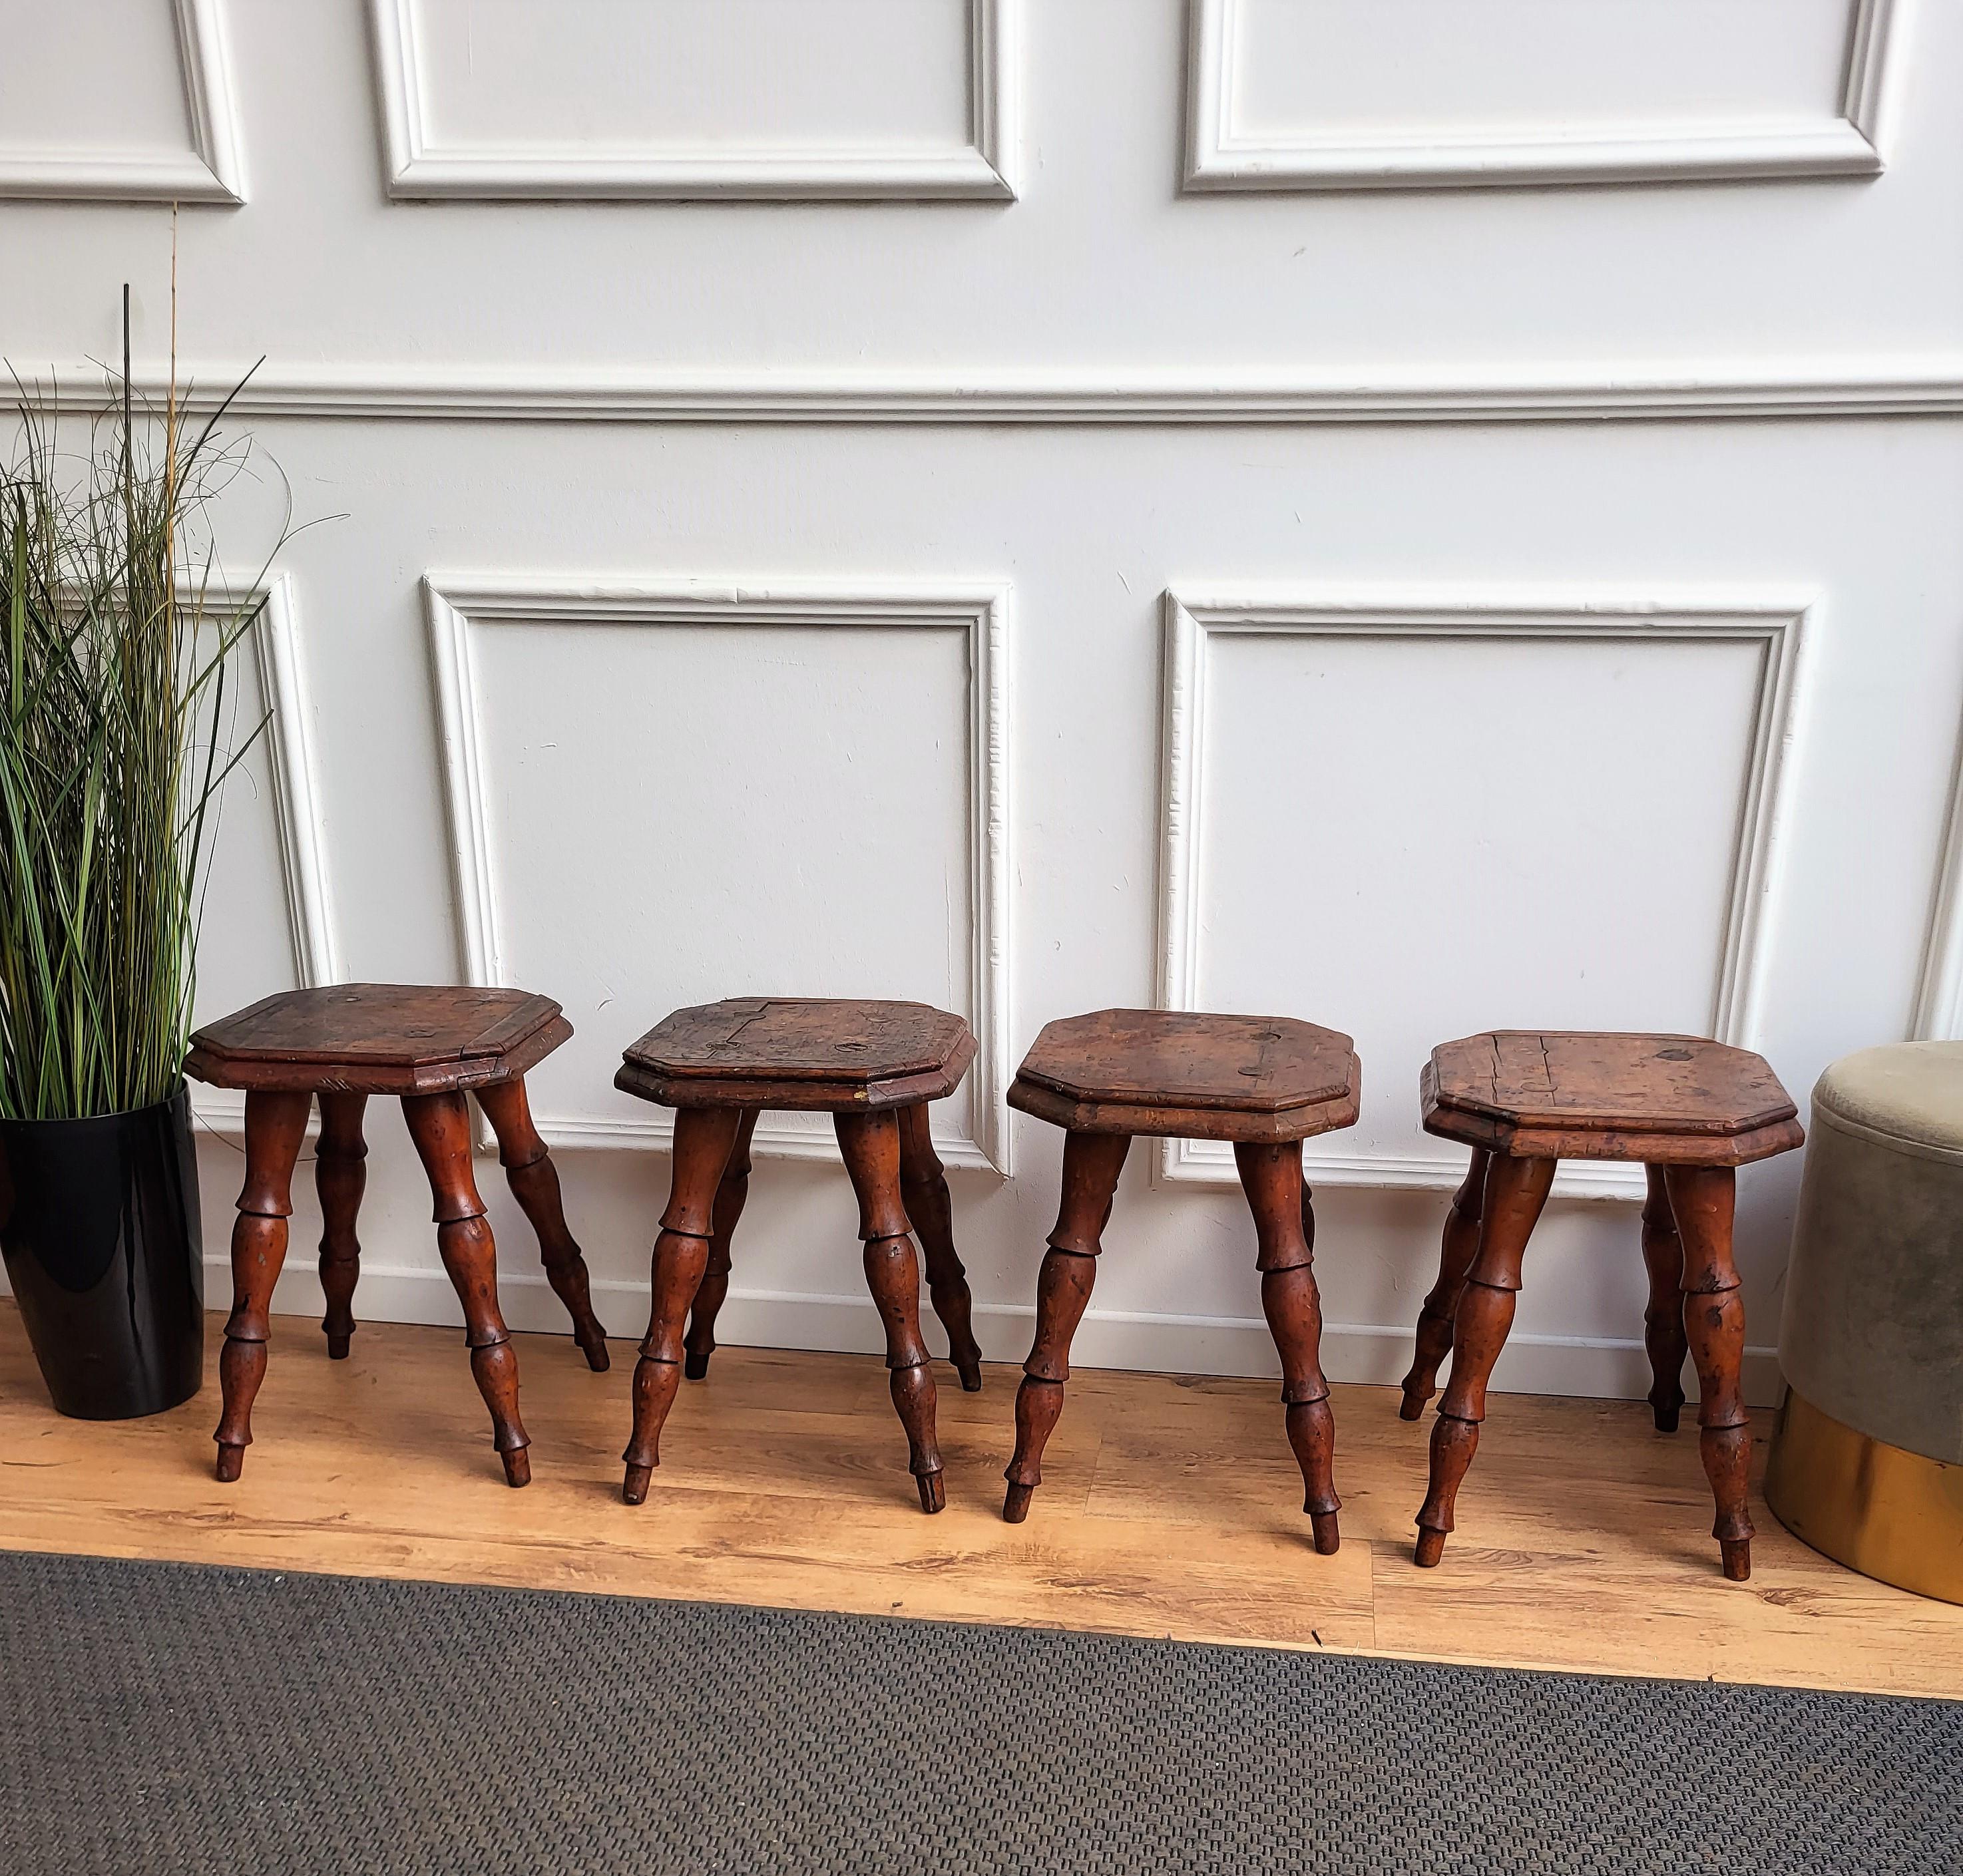 Beautiful set of 4 antique Italian solid walnut side tables or stools with squared and beveled seat or top standing on four beautifully carved legs. This Italian walnut stools or side coffee tables, with the rich and beautiful patina would look